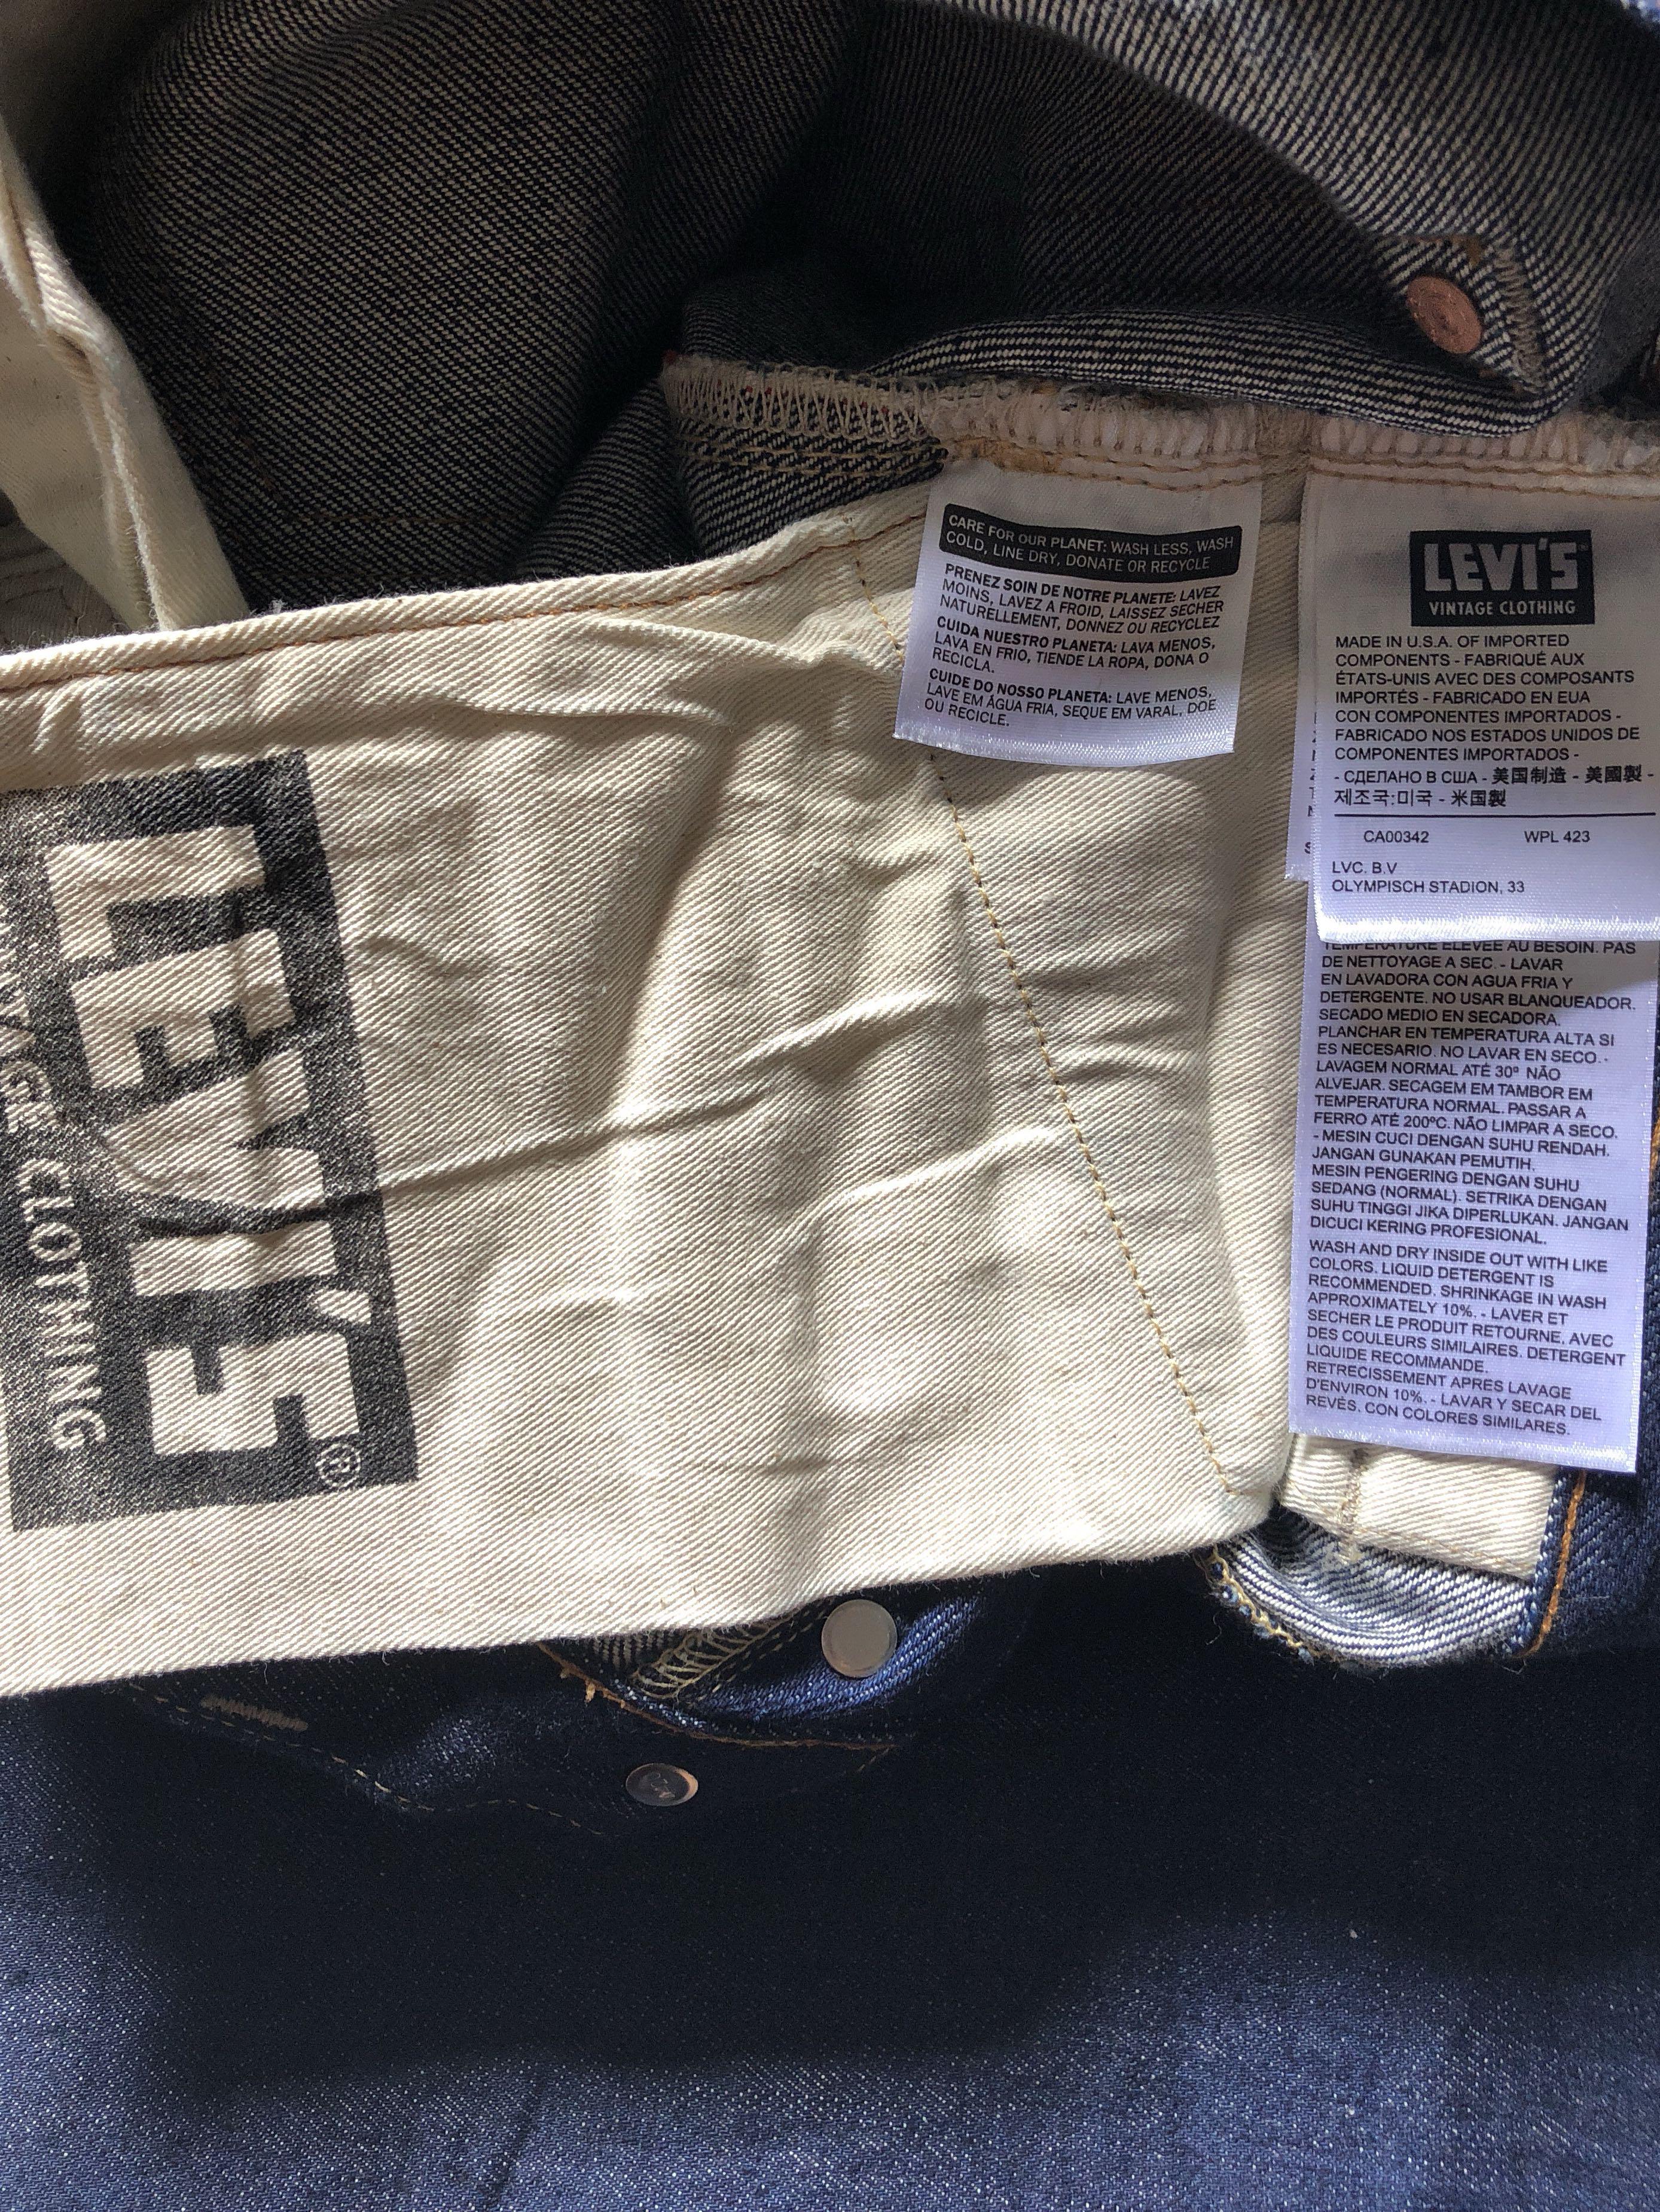 Levis vintage clothing 1937, Men's Fashion, Bottoms, Jeans on Carousell